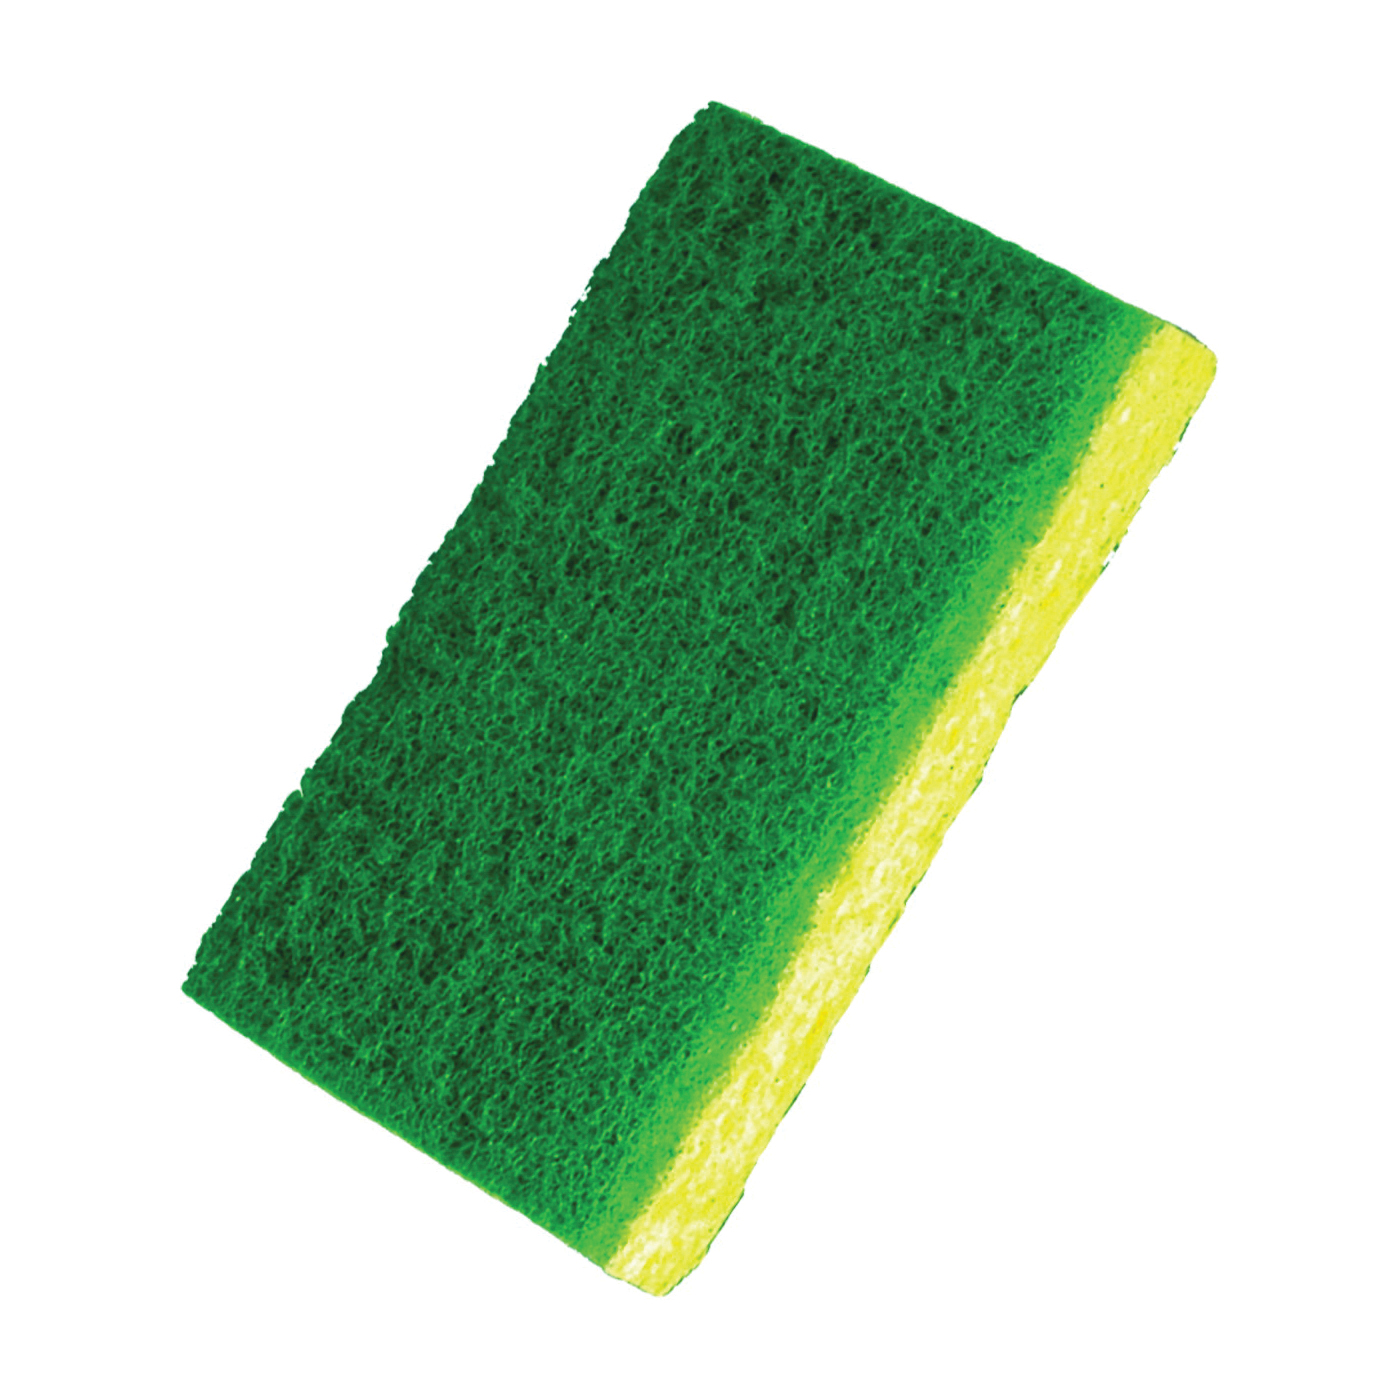 369-48 Scouring Pad, 4-1/2 in L, 2-7/8 in W, Green/Yellow